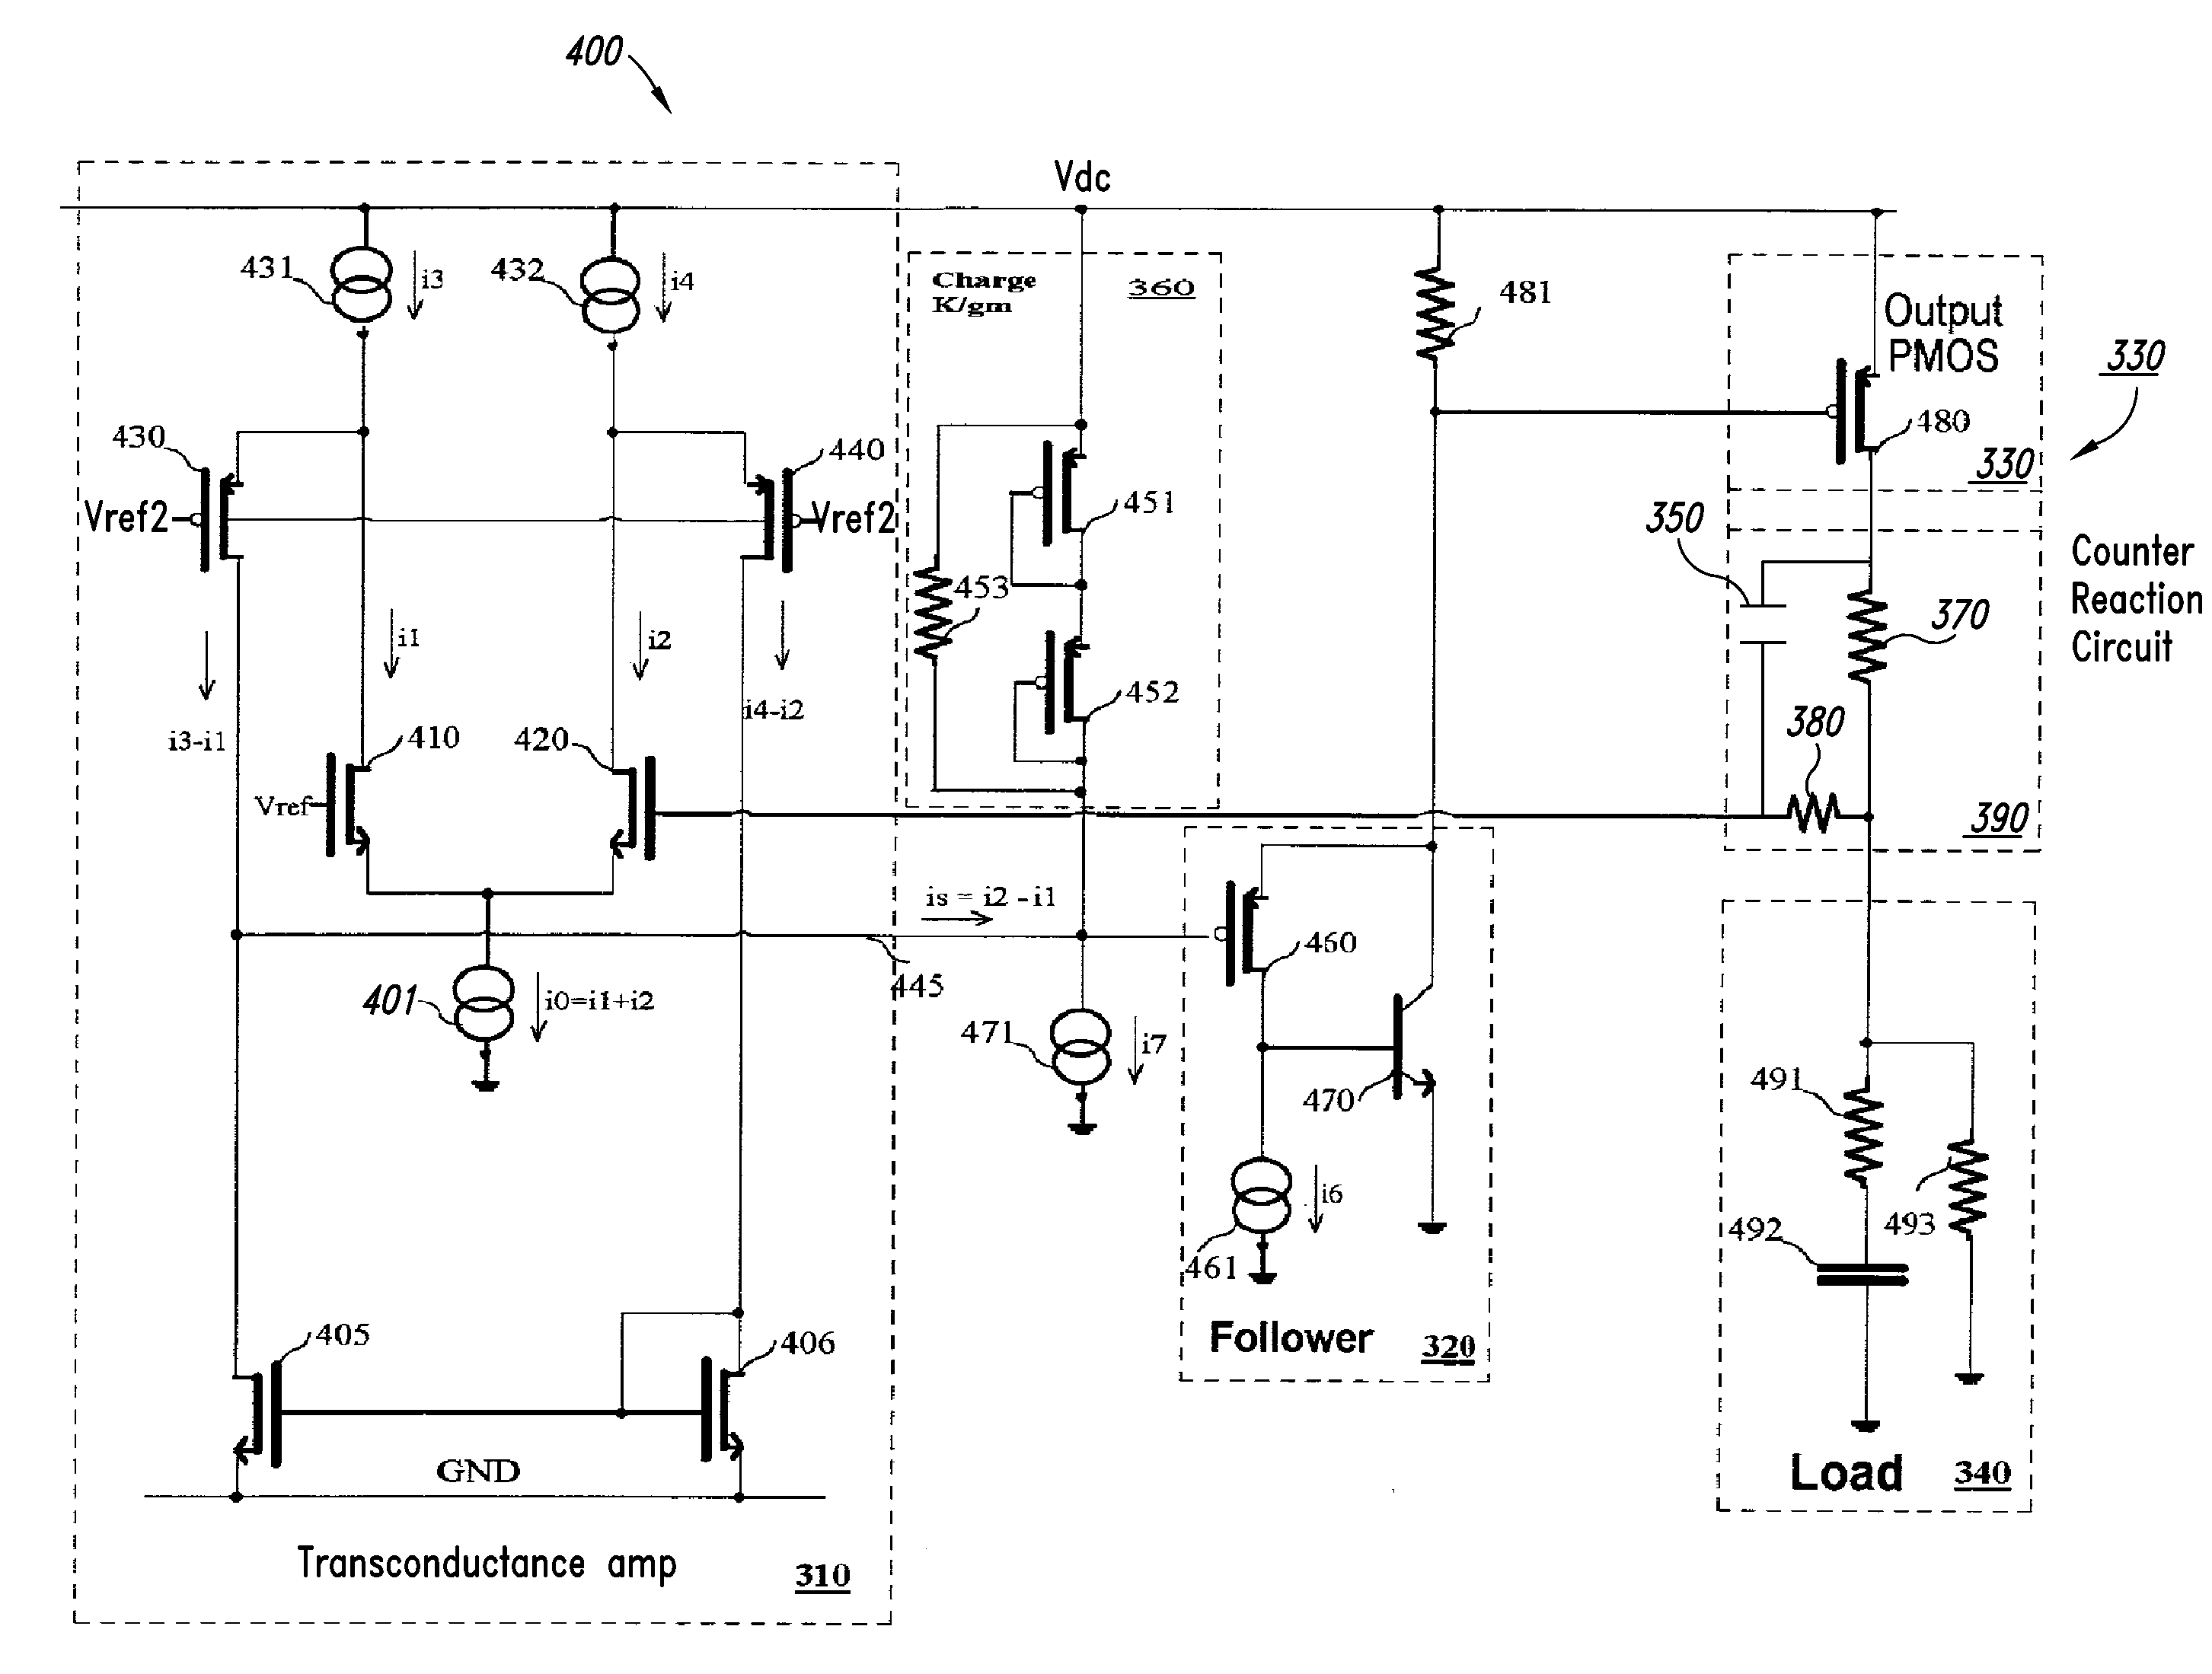 Series voltage regulator with low dropout voltage and limited gain transconductance amplifier